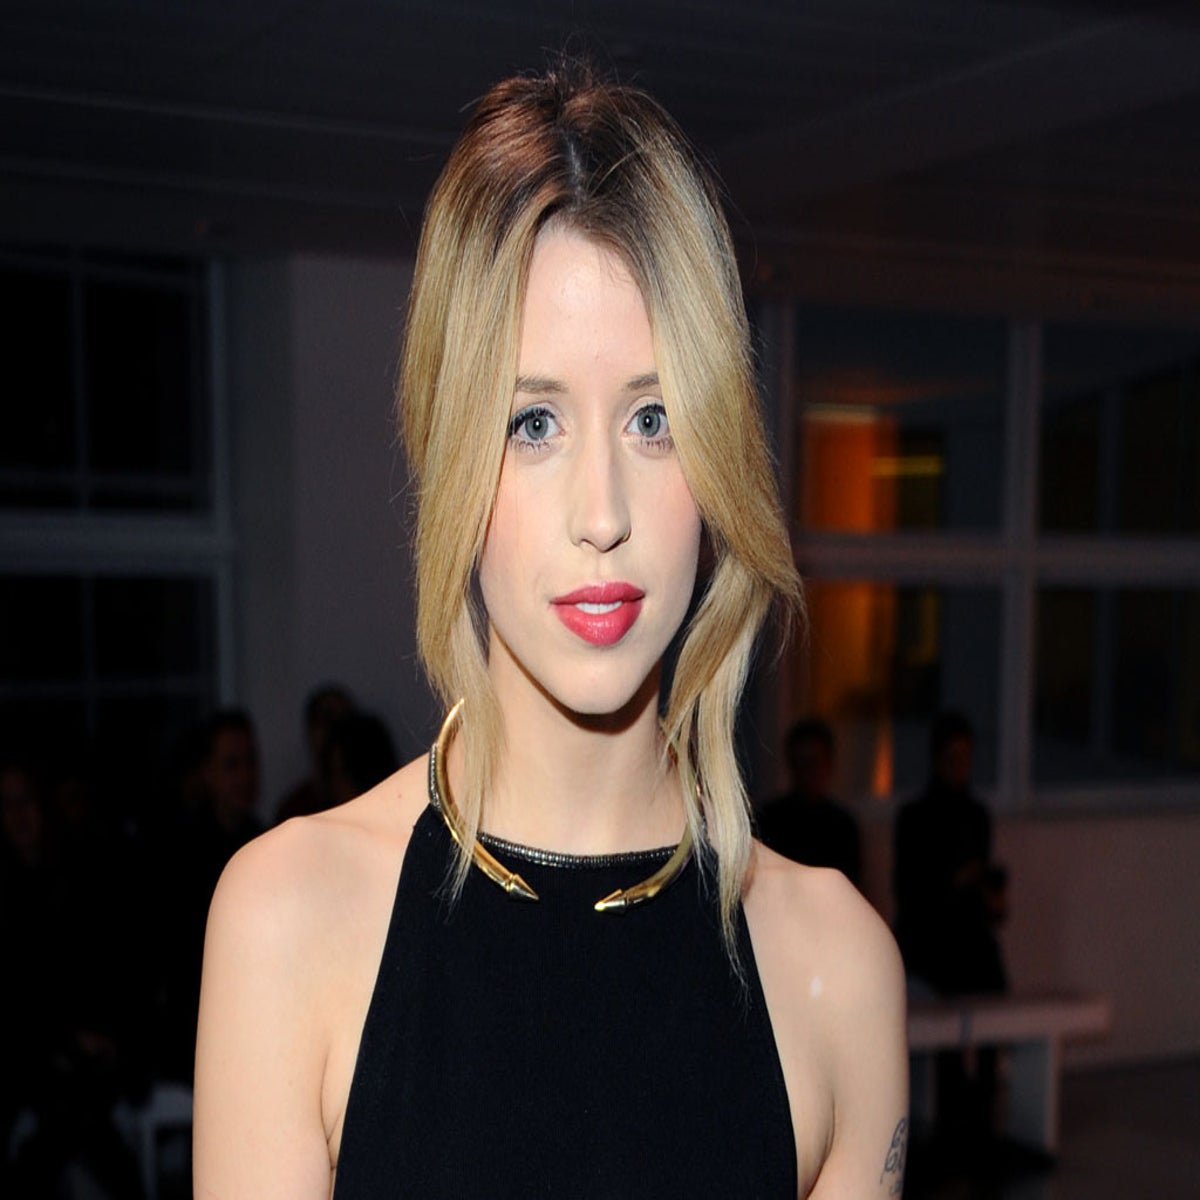 Peaches Geldof cause of death: Socialite had taken fatal dose of heroin  after years of addiction, inquest concludes, The Independent